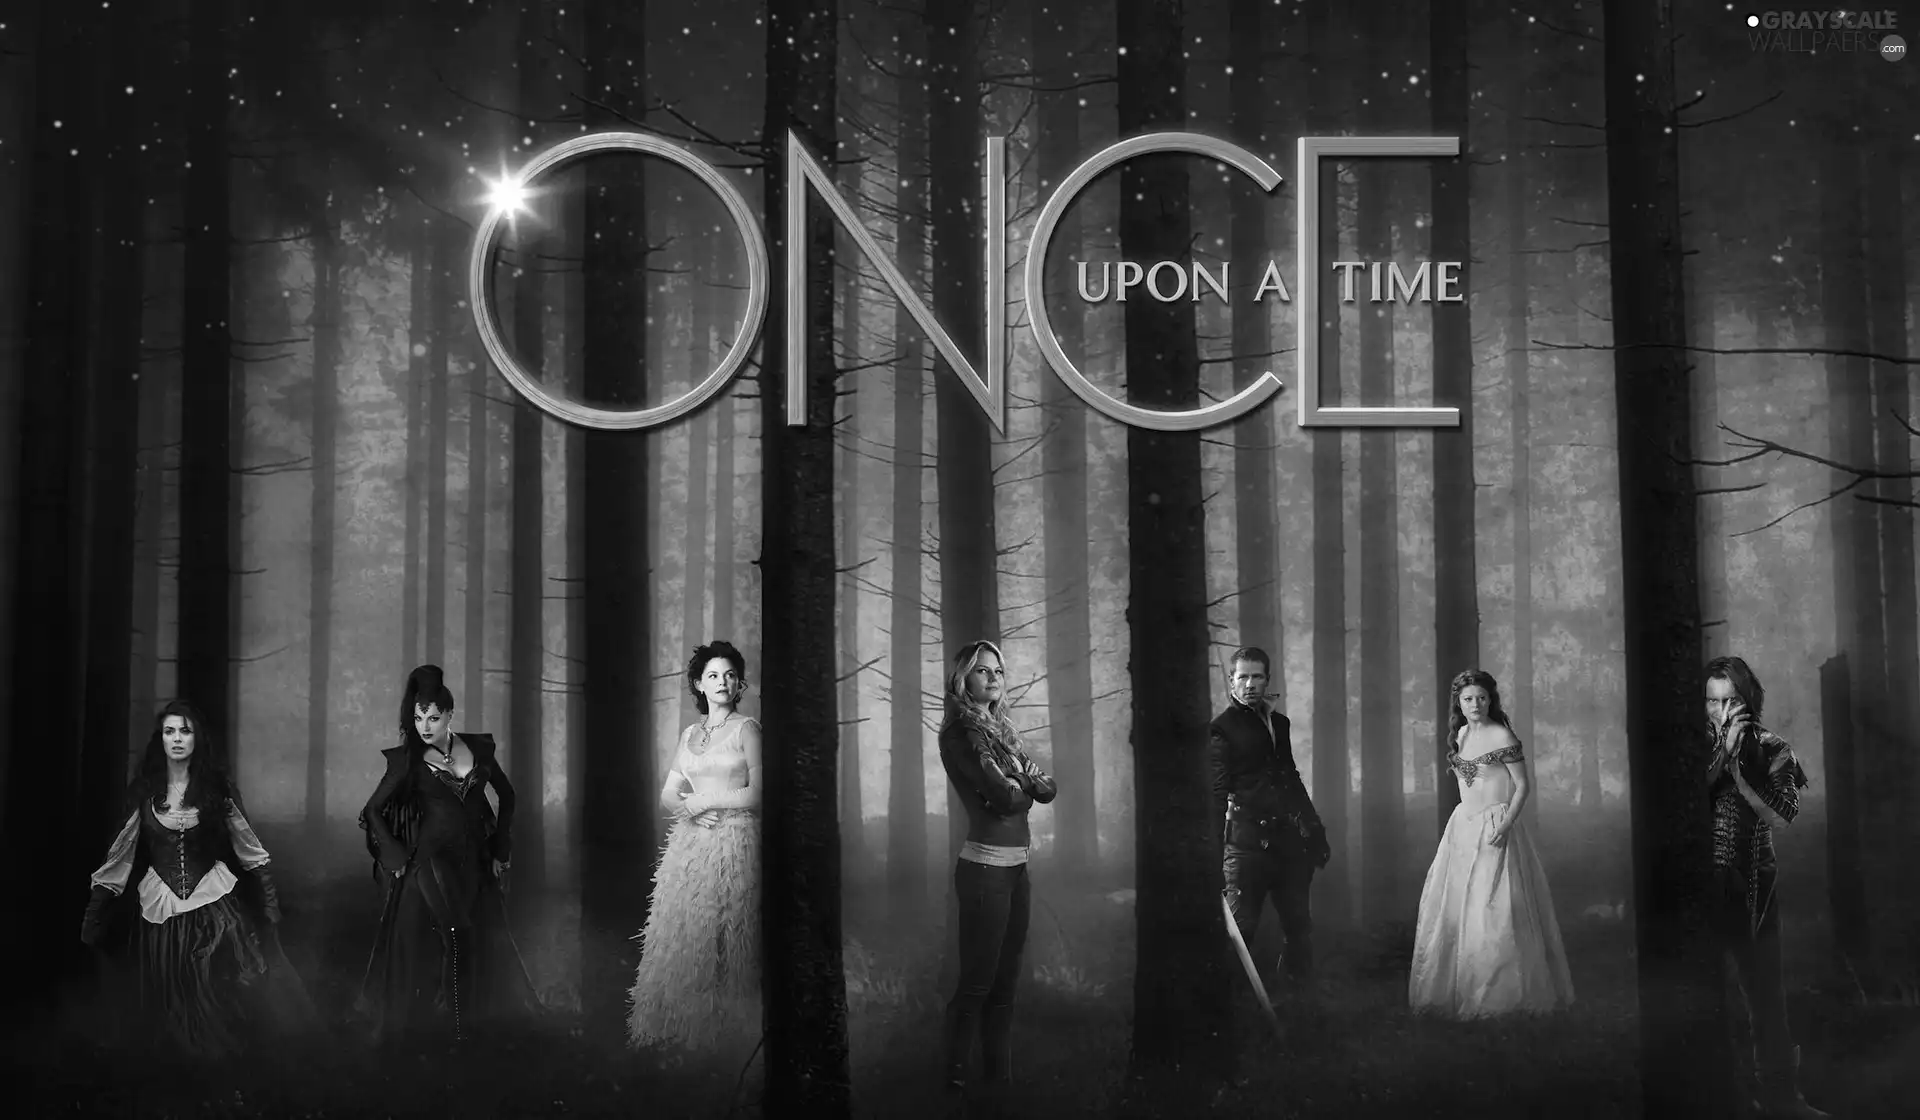 Cast, A Long Time Ago, Once upon a time